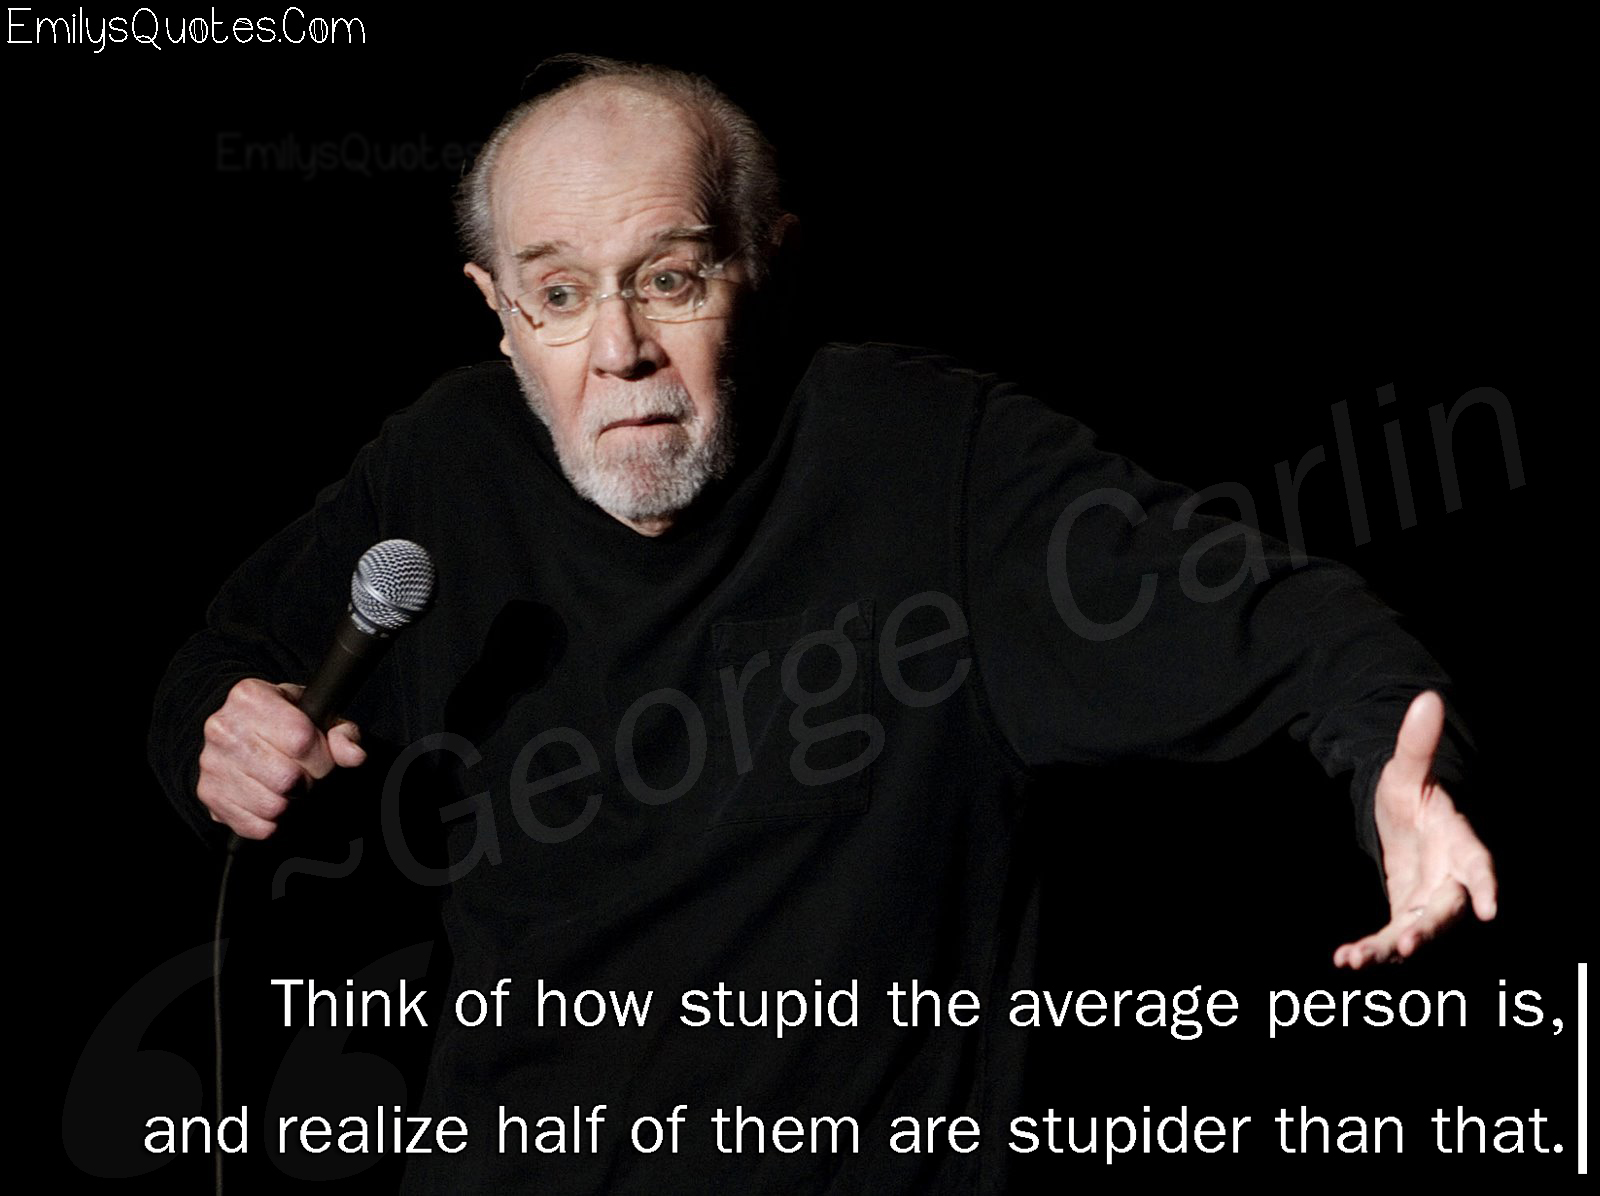 Think of how stupid the average person is, and realize half of them are